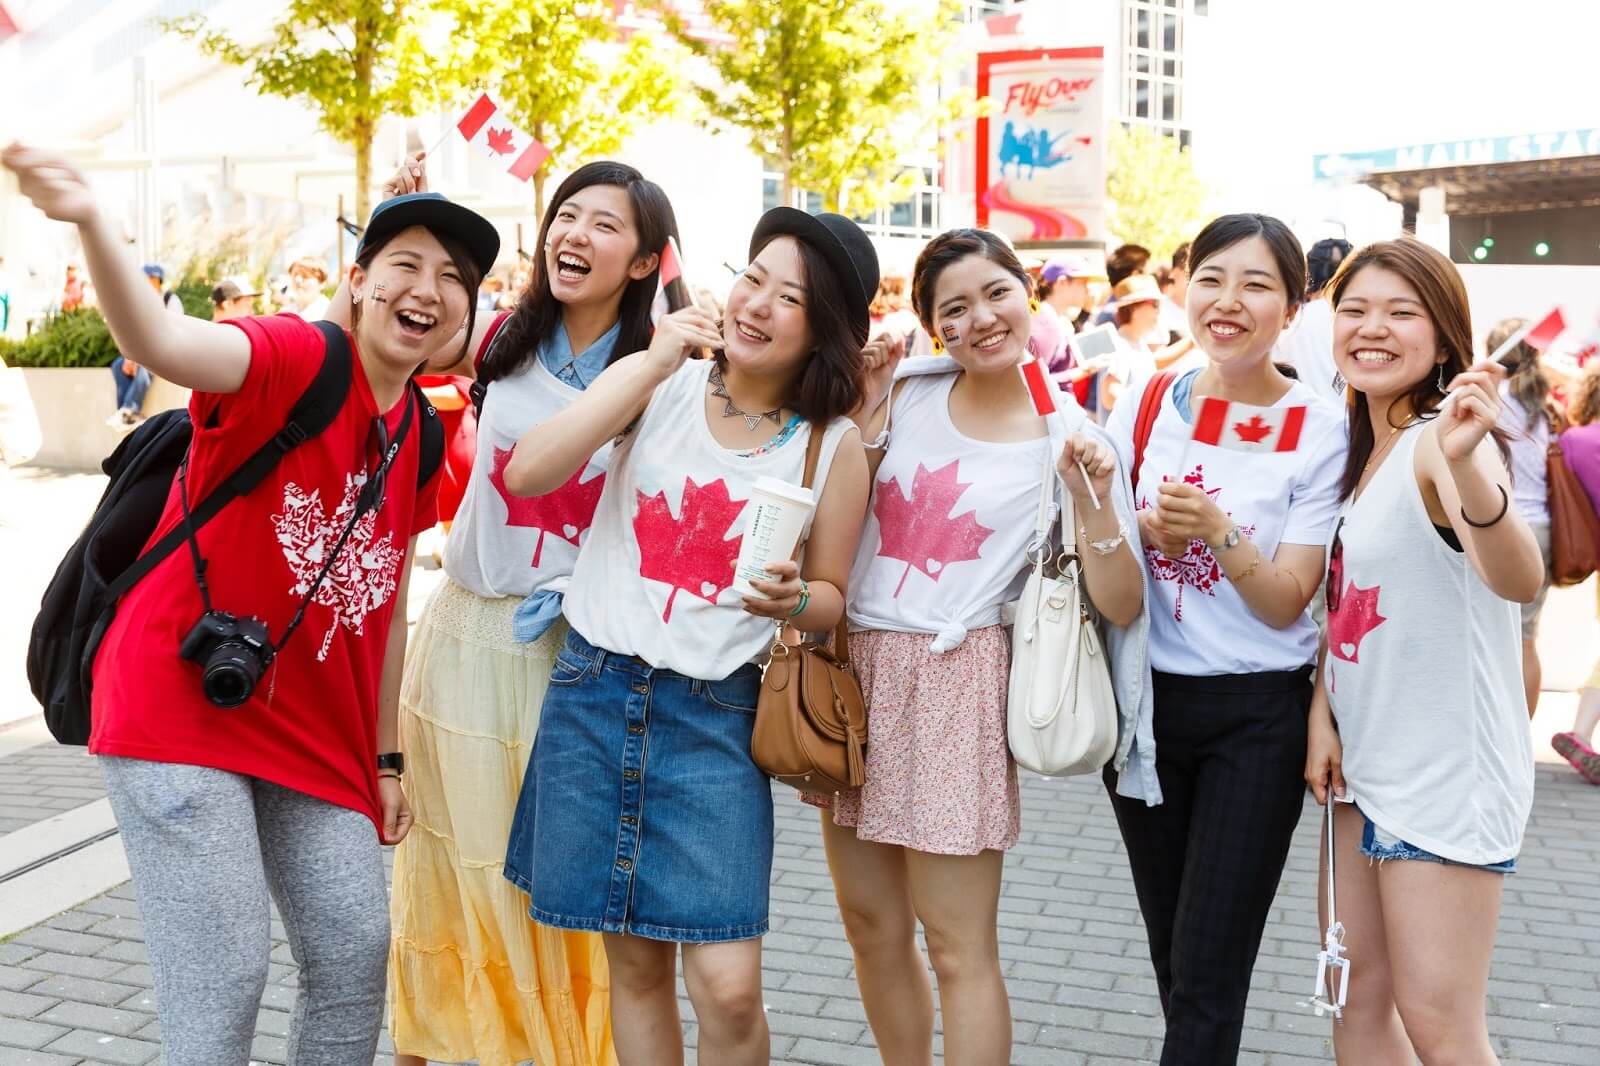 Global travelers want to meet travelers of their own nationalities on holiday